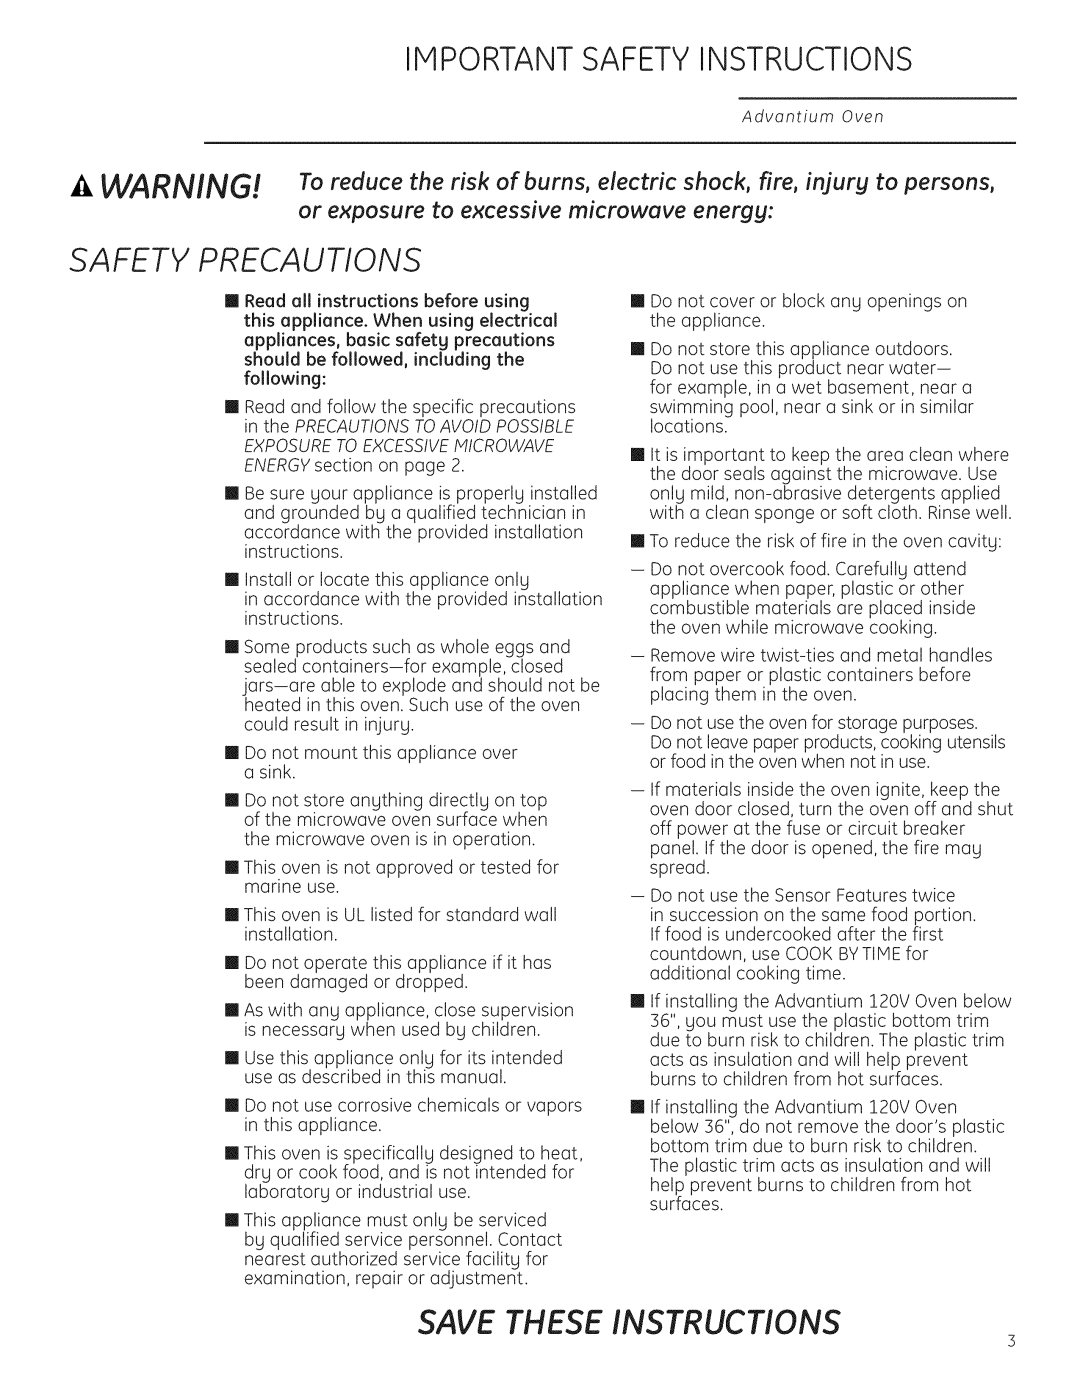 GE Monogram ZSC1201, ZSC1202 Safety Precautions, Save These Instructions, or exposure to excessive microwave energy 